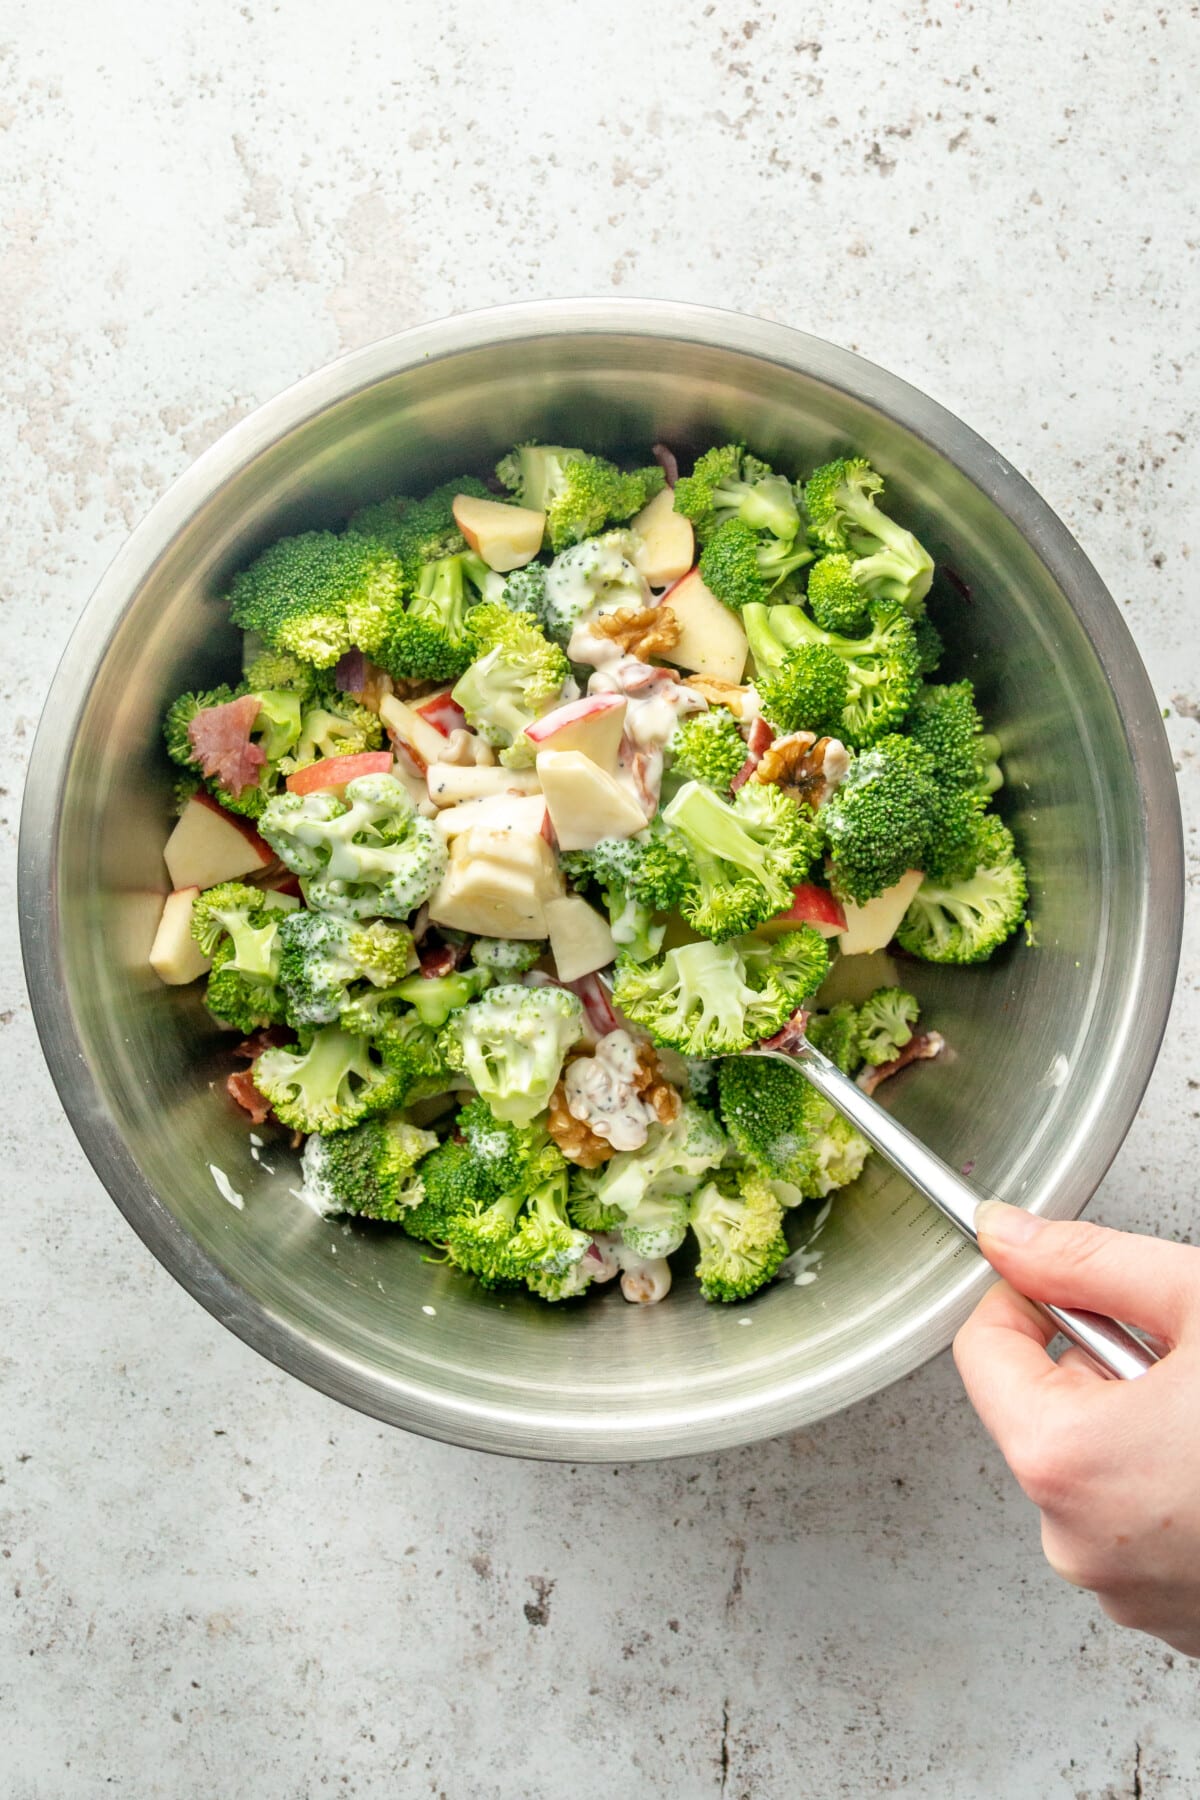 A dressing is stirred through a crunchy broccoli salad sitting in a stainless steel bowl on a light grey surface.